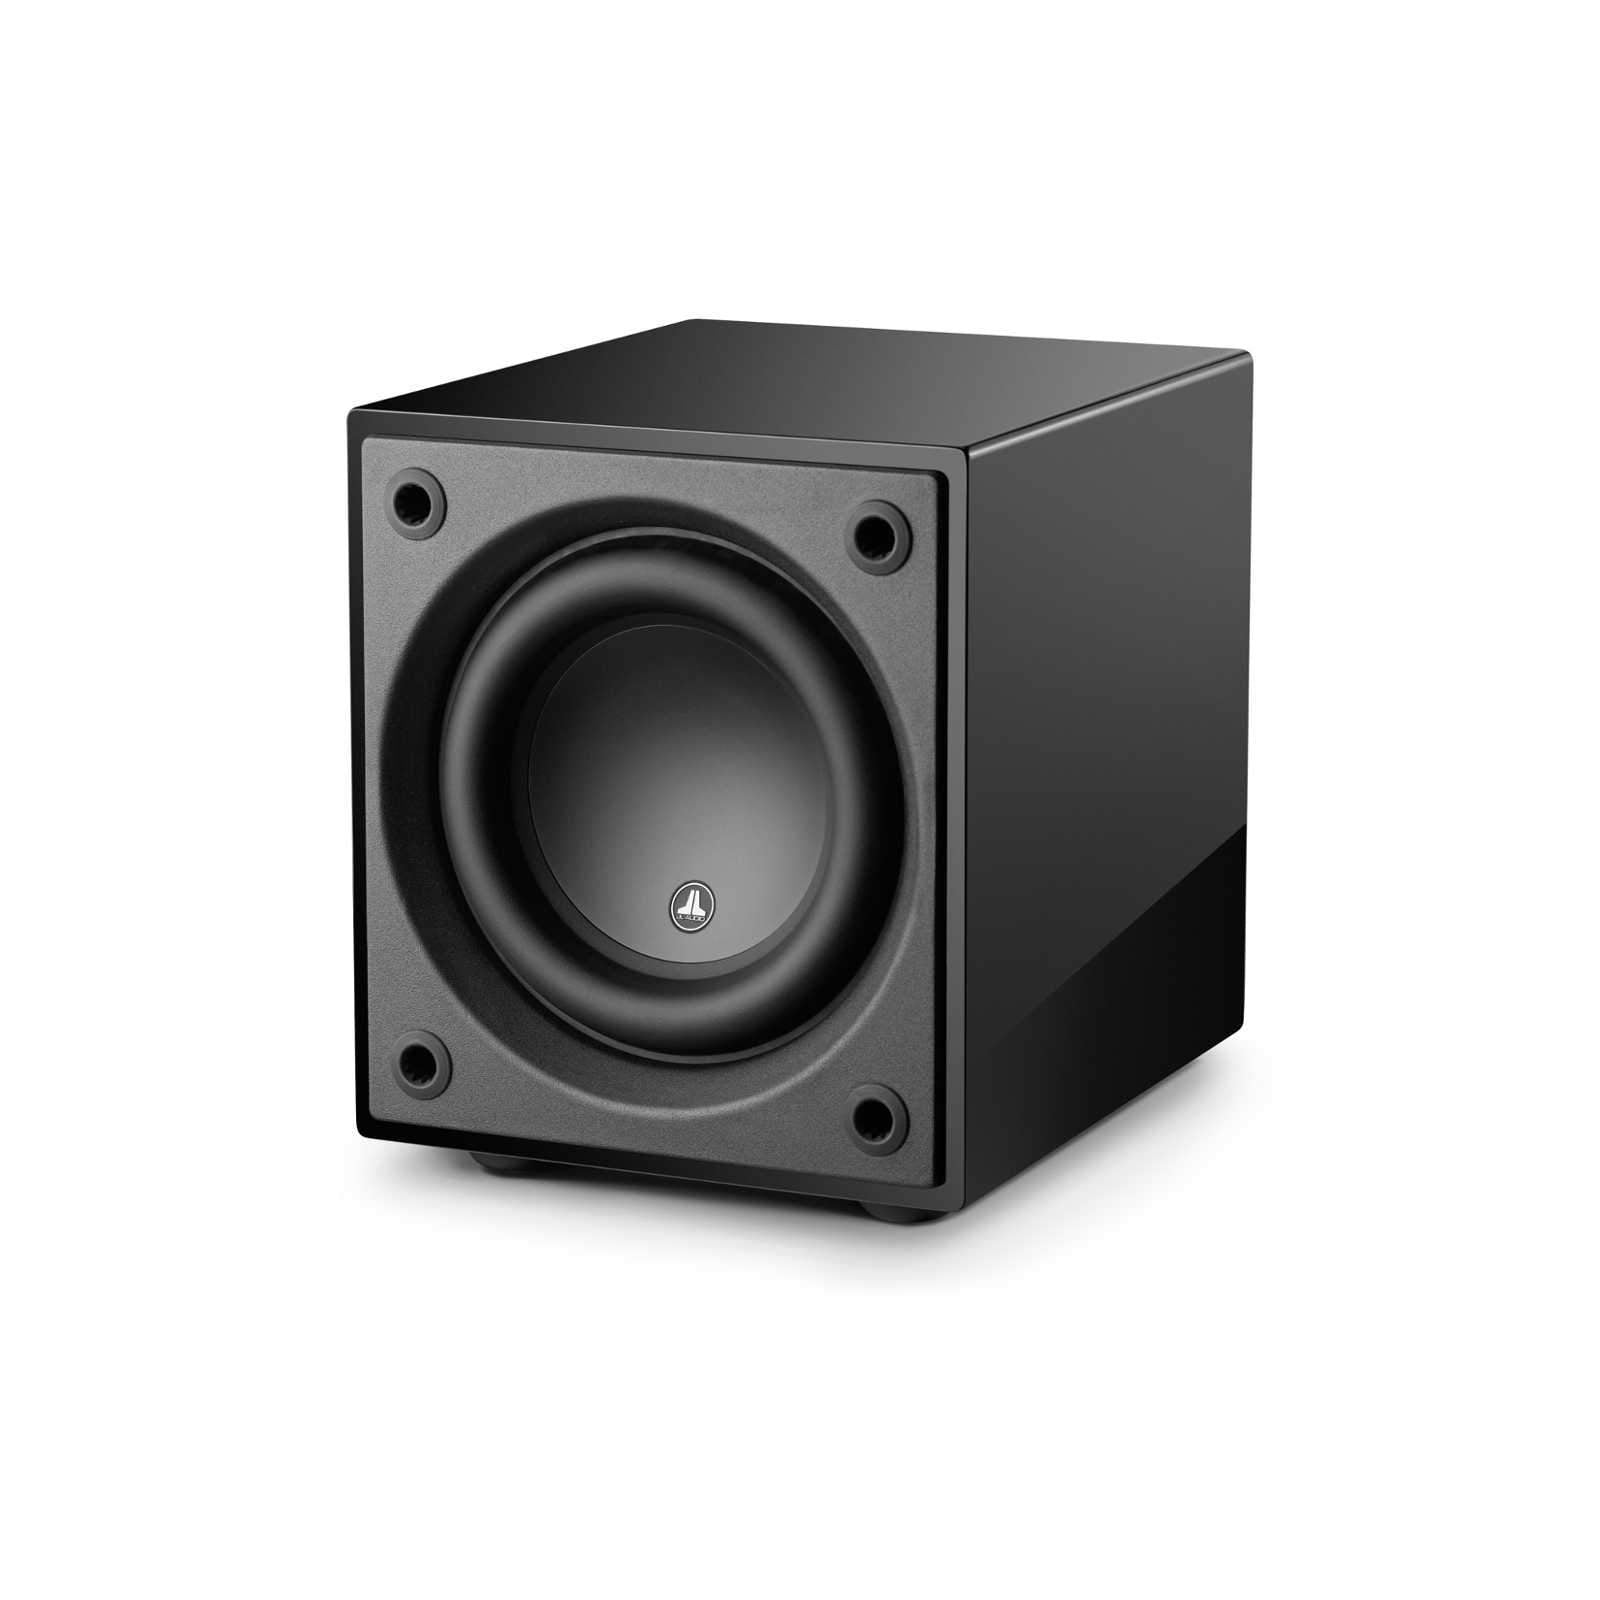 JL Audio Dominion D108 8" 500W Subwoofer - Gloss Black - The Audio Experts